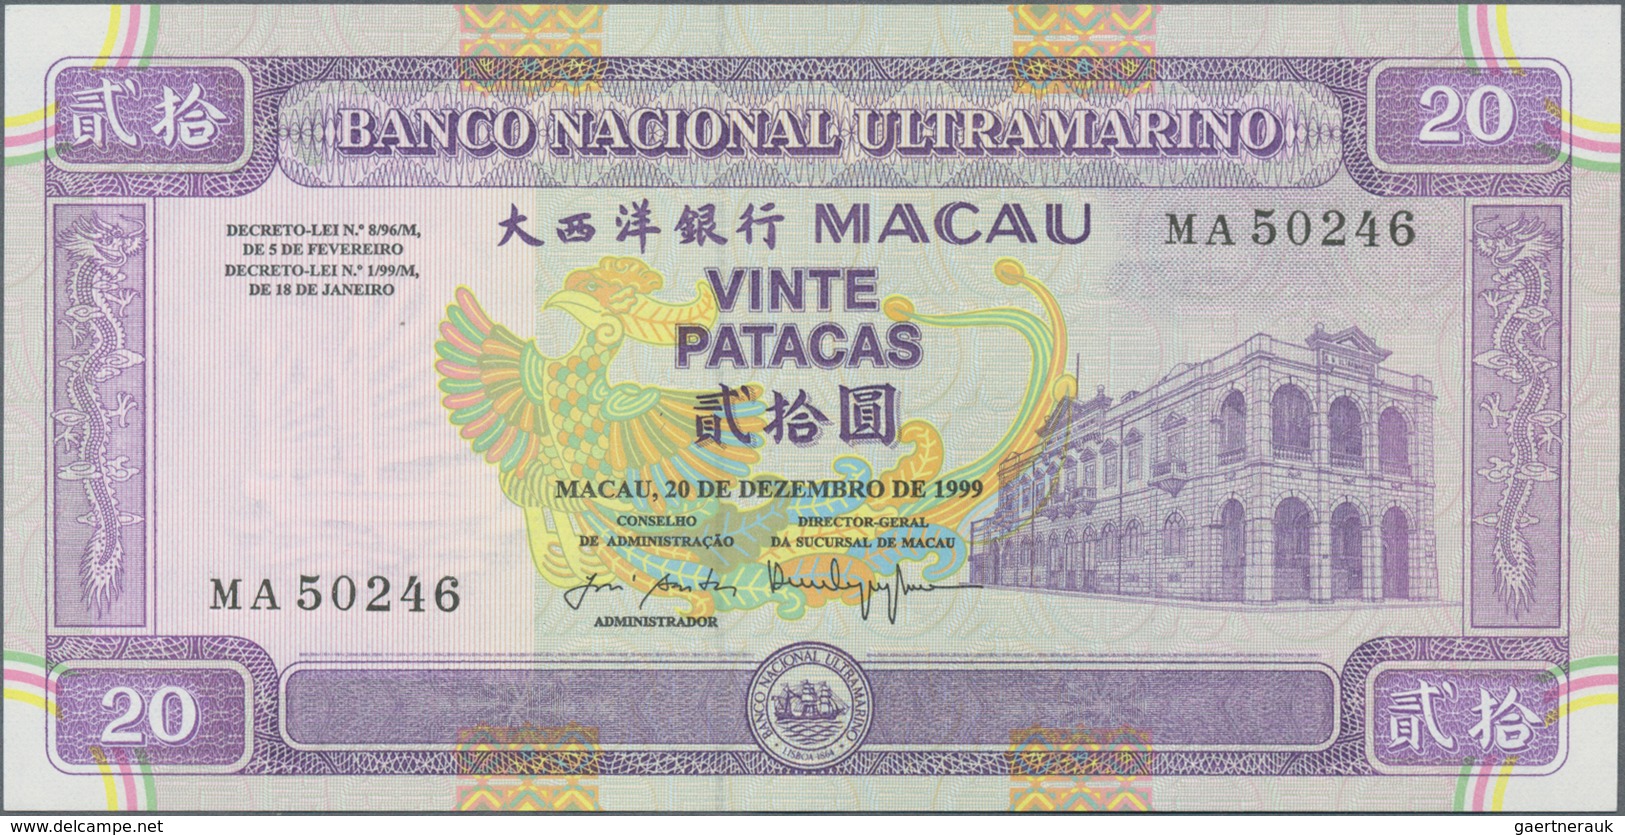 Macau / Macao: Original Folder By The Banco Nacional Ultramarino For The Issue Of The New Banknote S - Macao